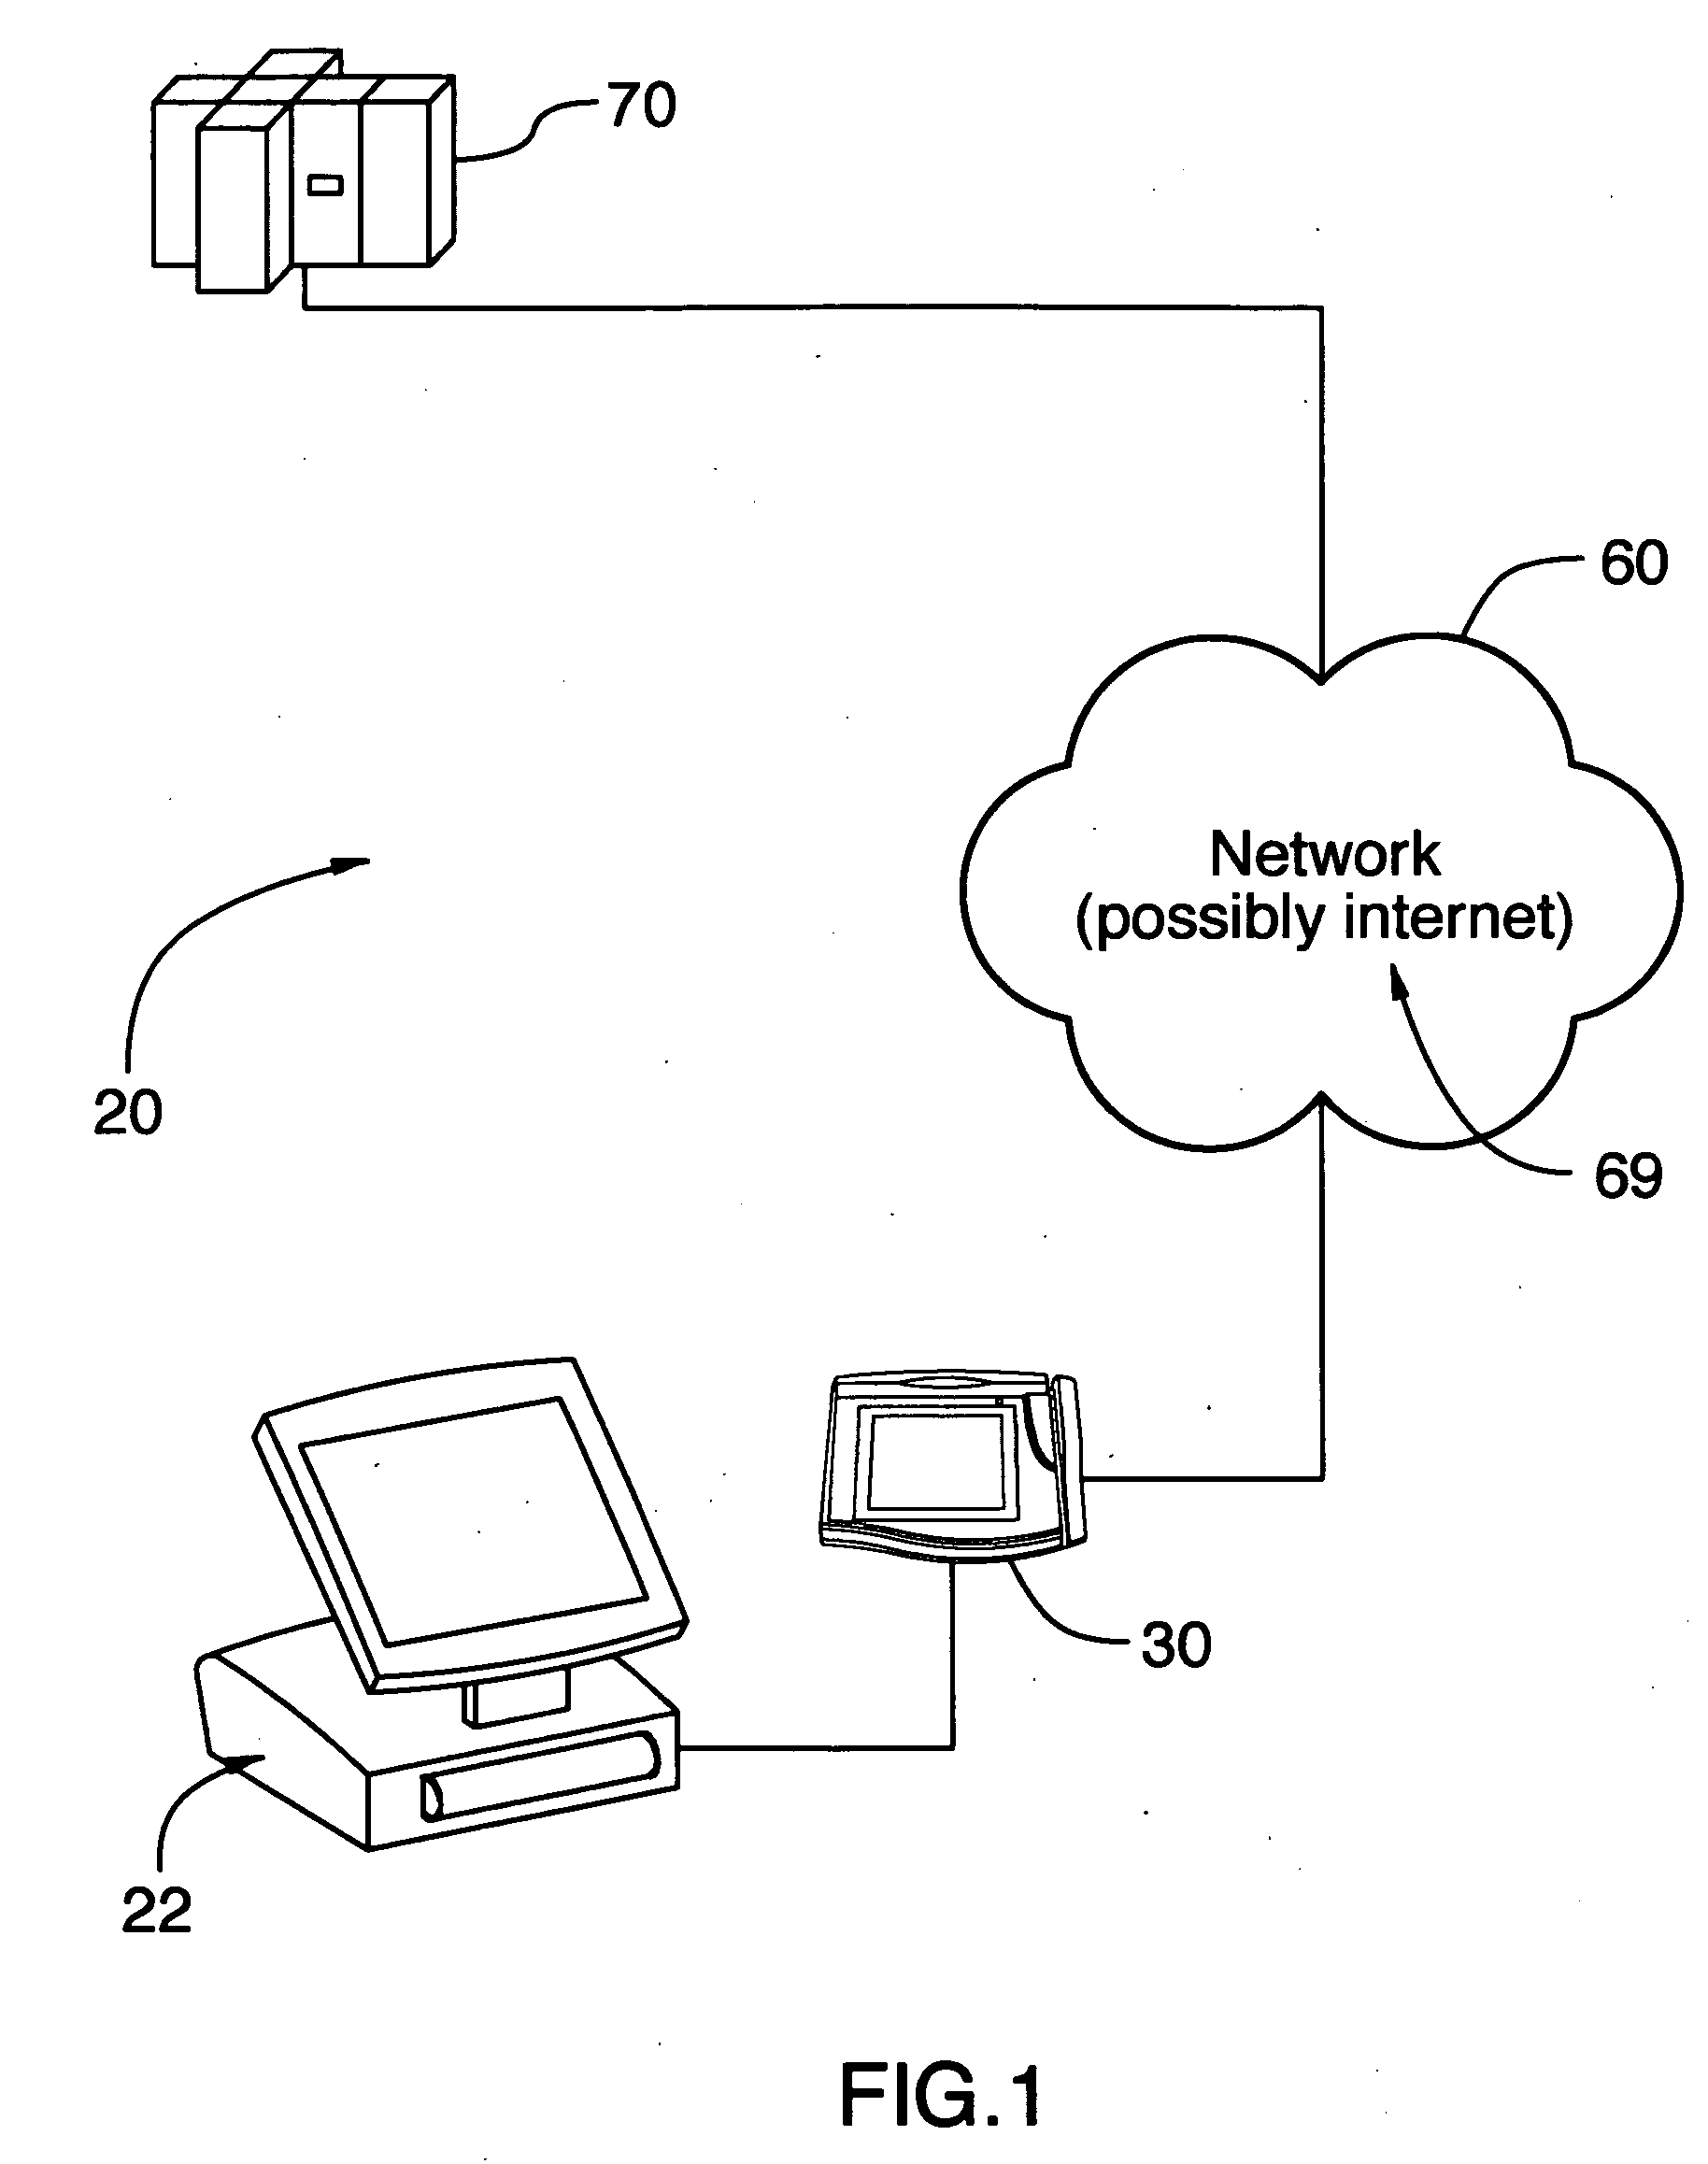 Electronic balance checking and credit approval system for use in conducting electronic transactions